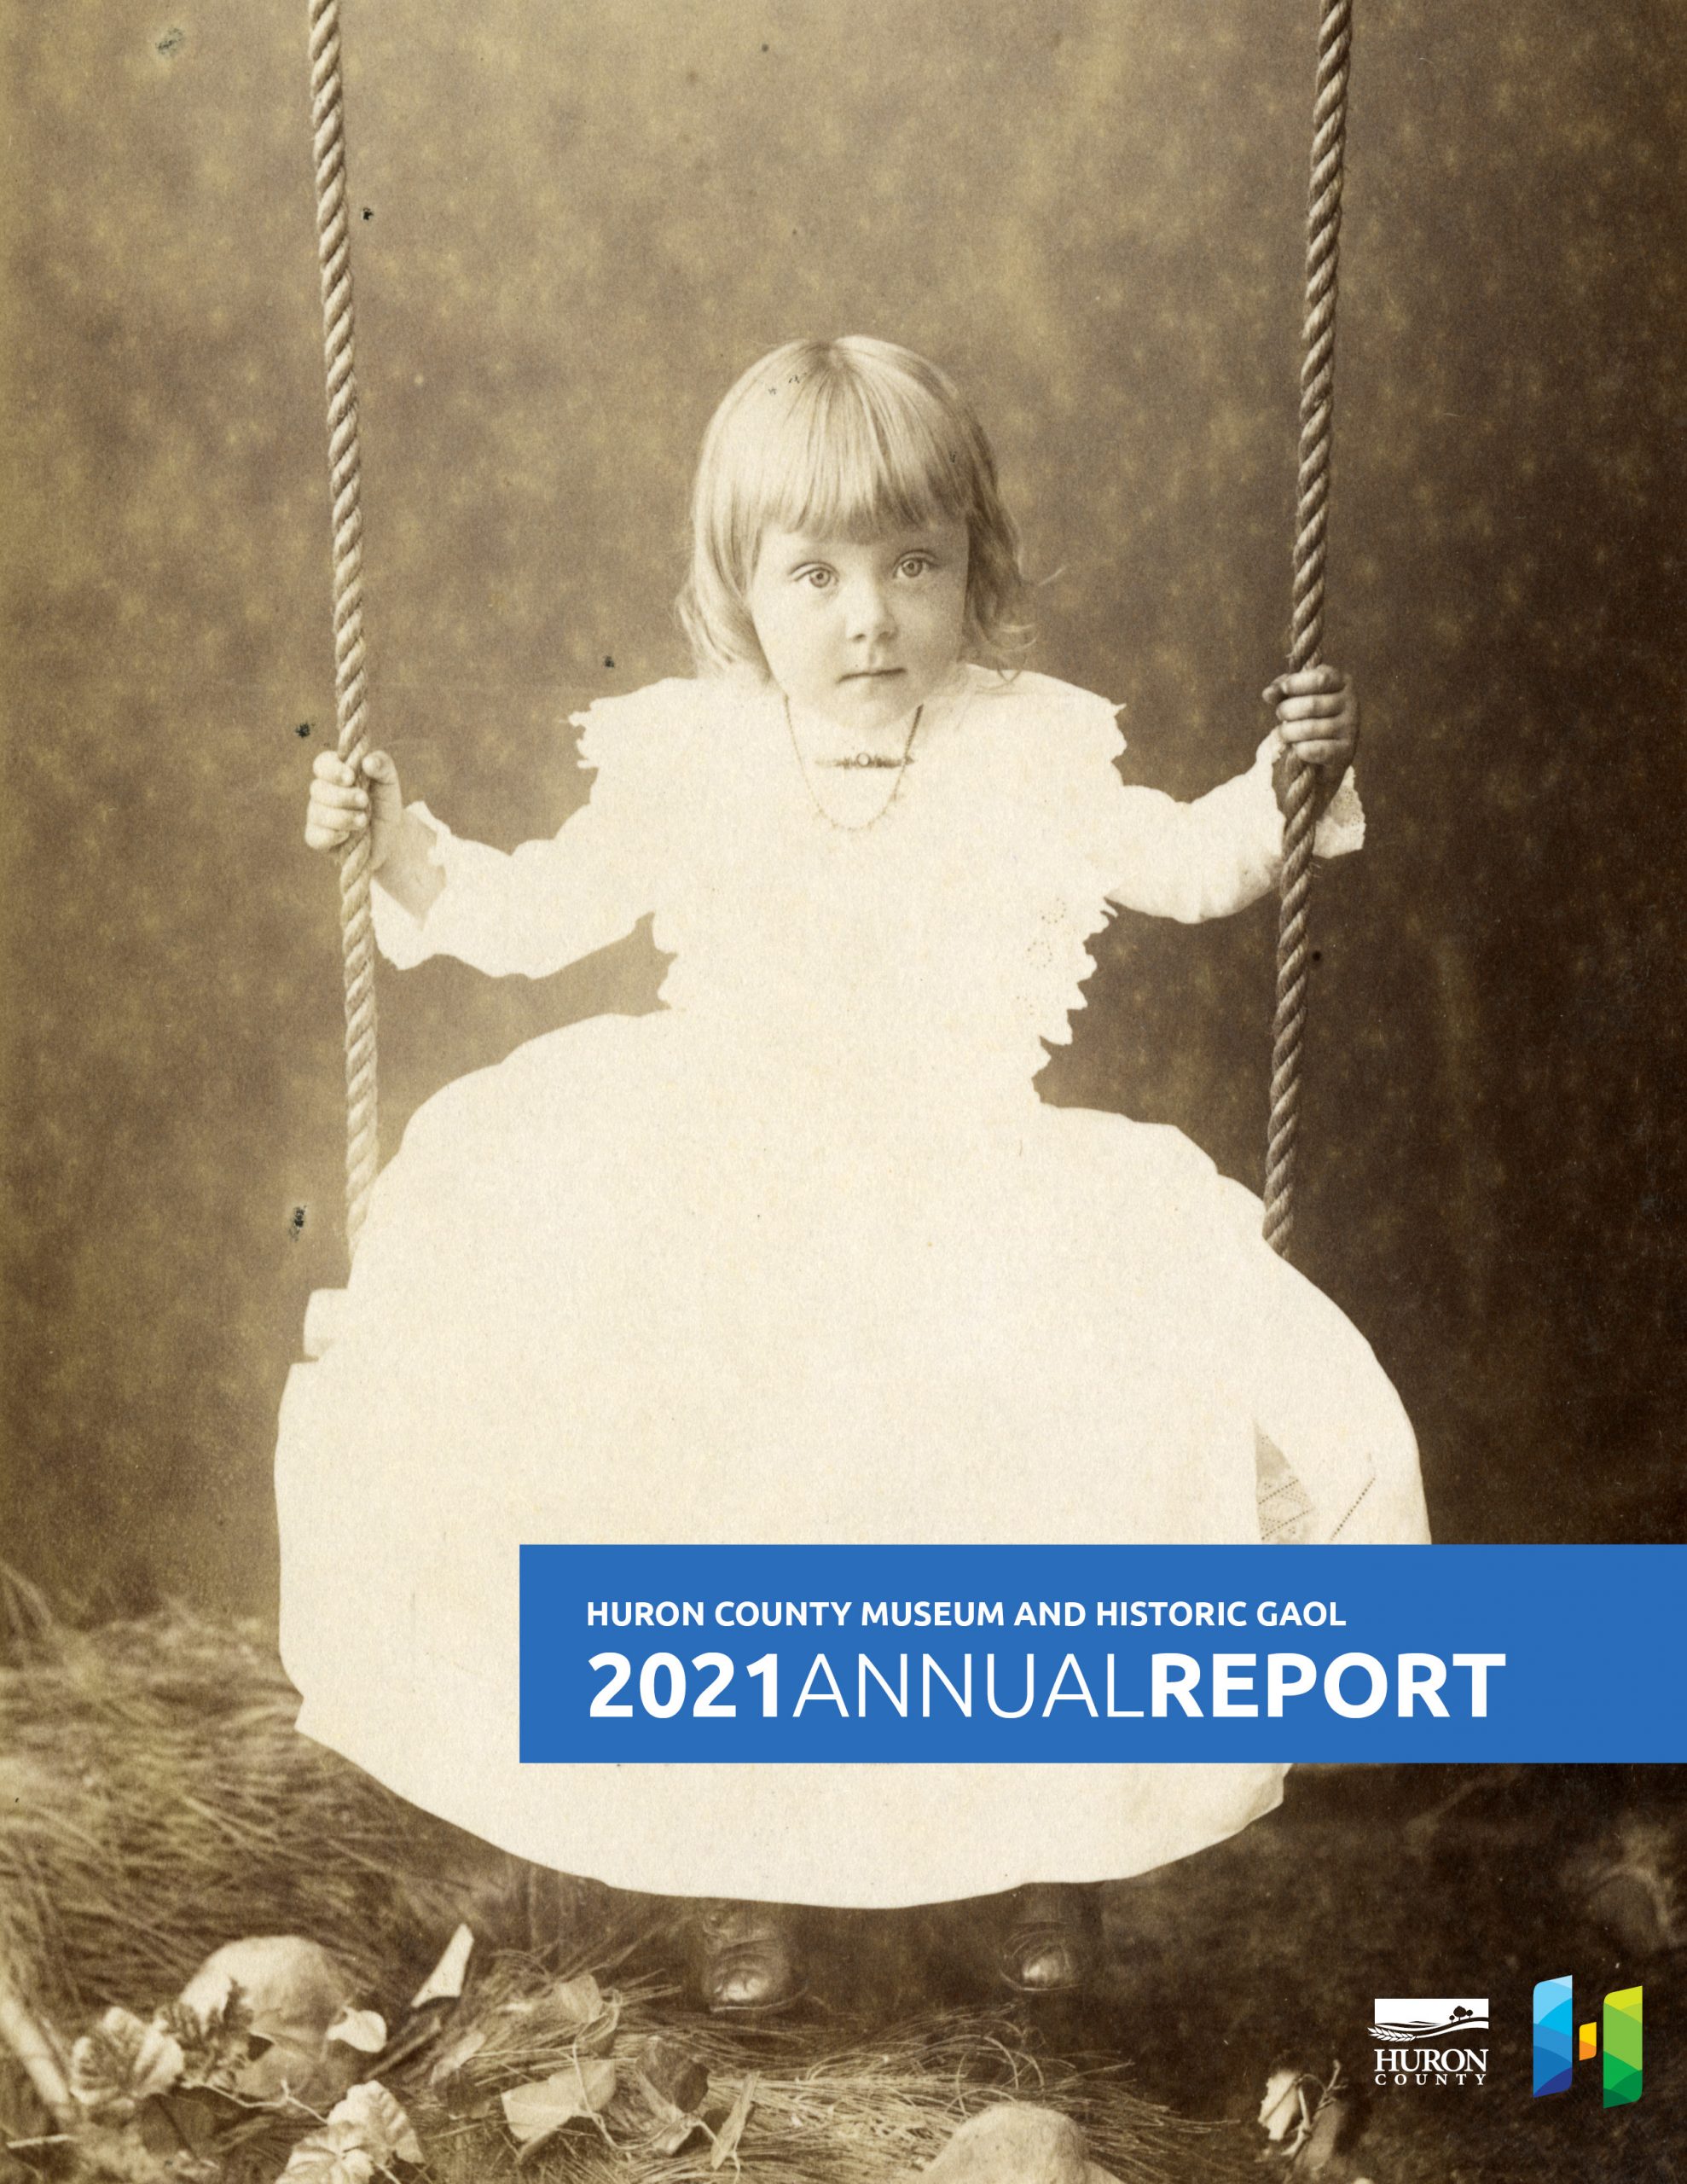 Annual Report cover featuring historic photo of a little girl on a swing